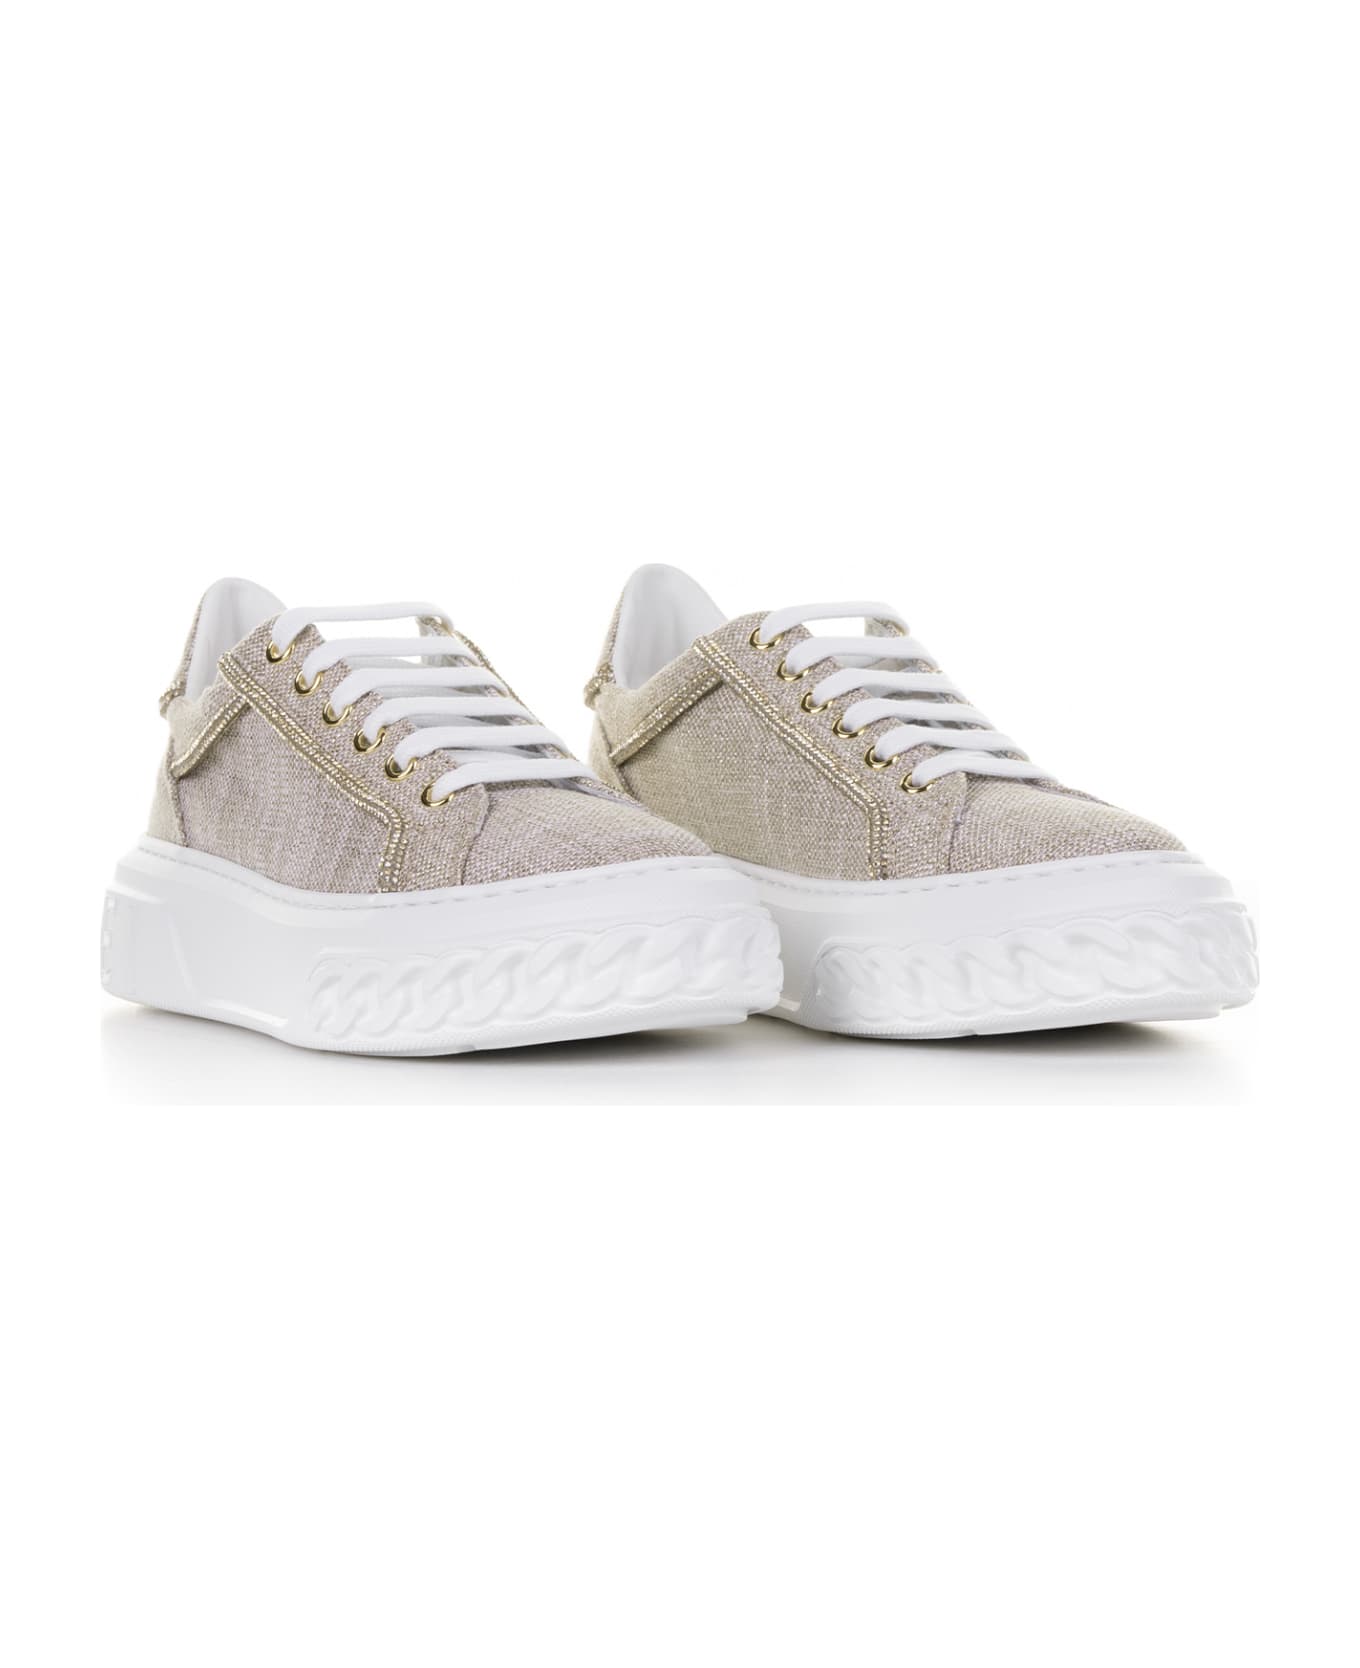 Casadei Canvas Sneakers With Rhinestone Profiles - GOLD HONEY